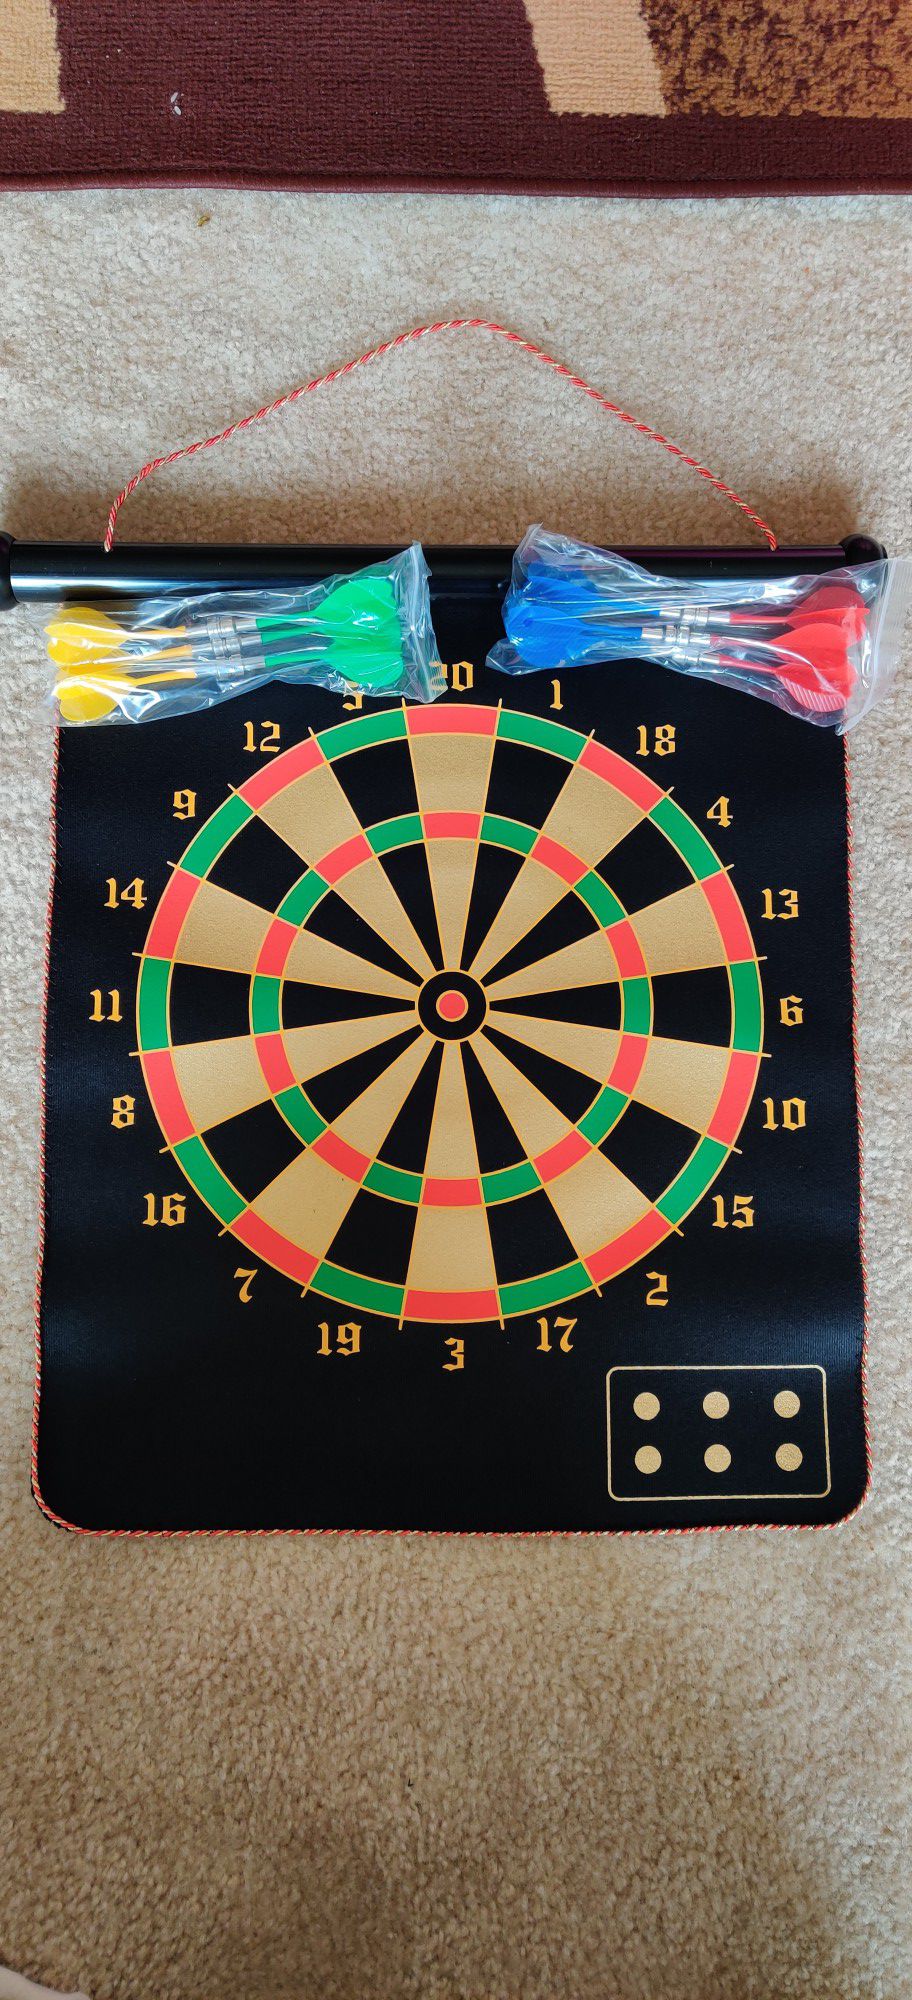 Magnetic dart board indoor and outdoor dart games..for kids with 12 PC's magnetic darts, safety toy game's roll-up double sided board